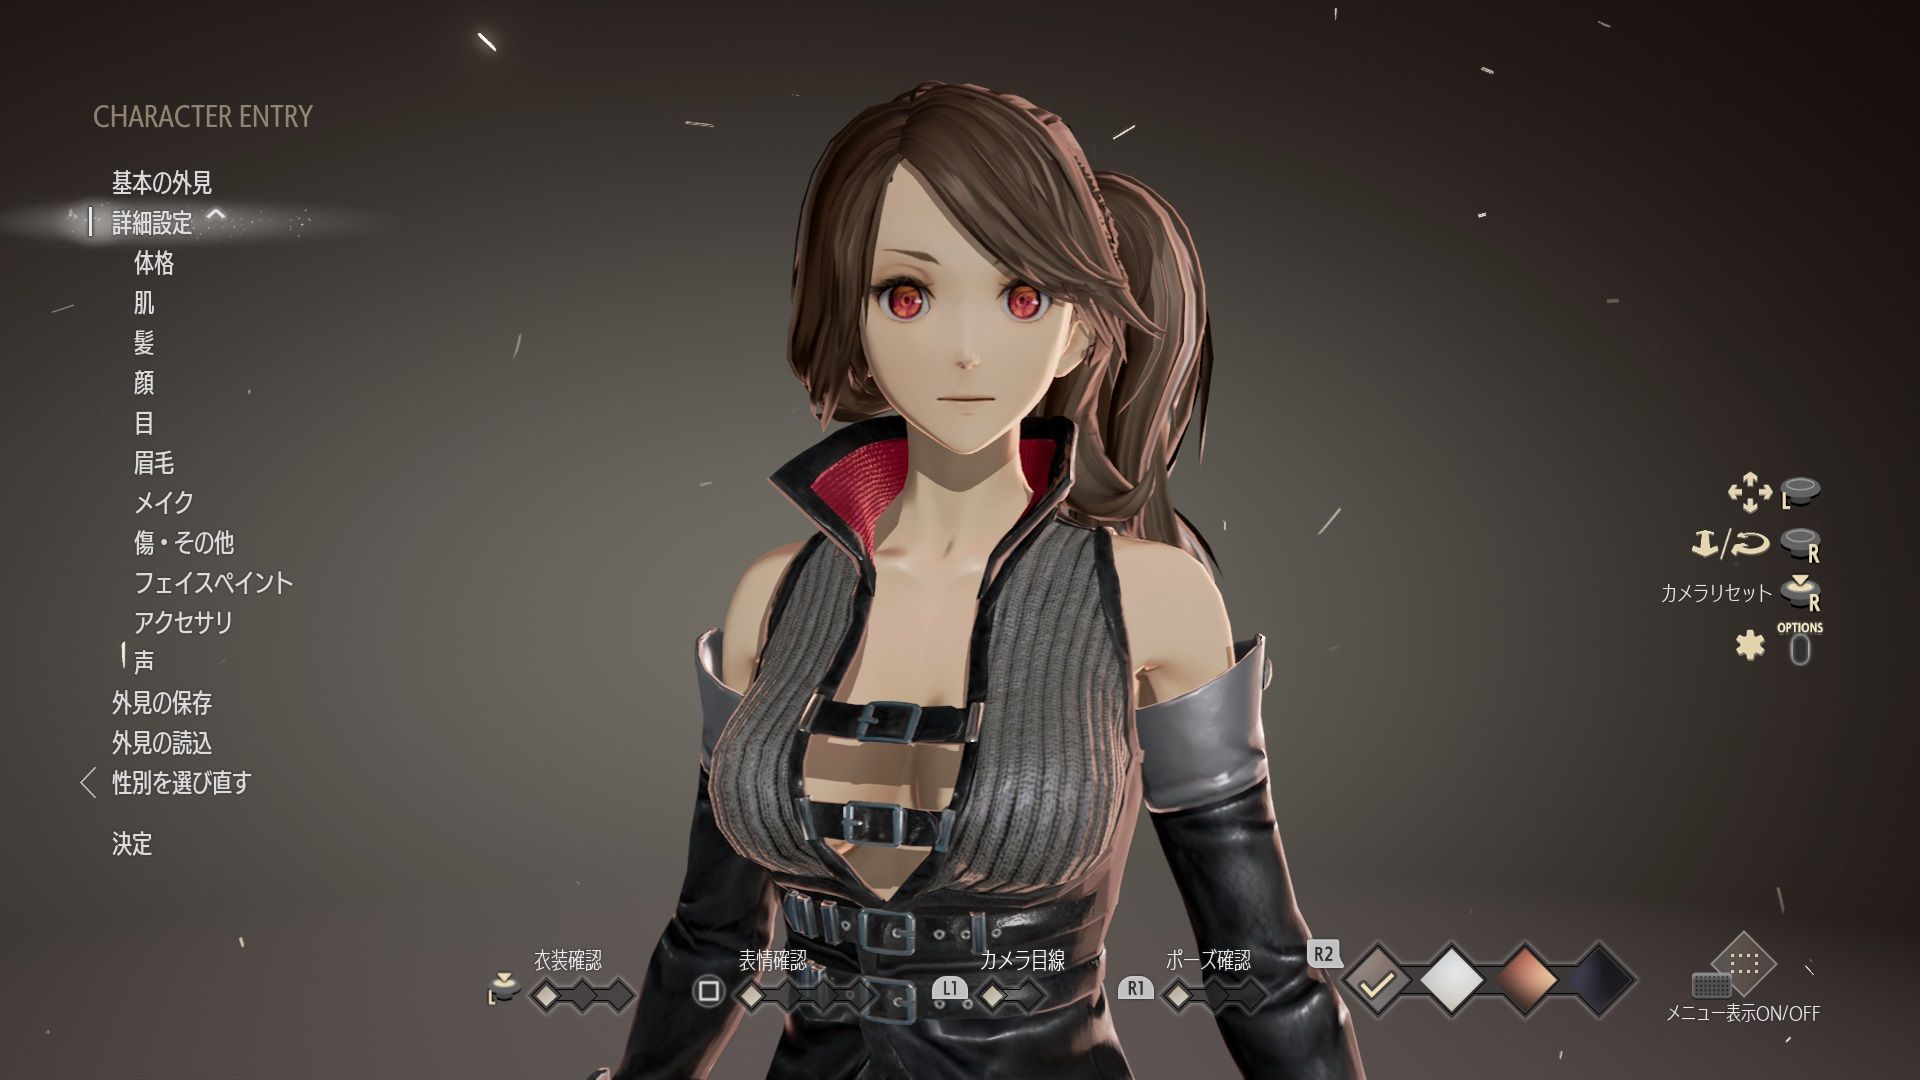 Code Vein Doesn't Play Very Well, but Its Character Customization Is Pretty  Awesome (Hands-On Preview)